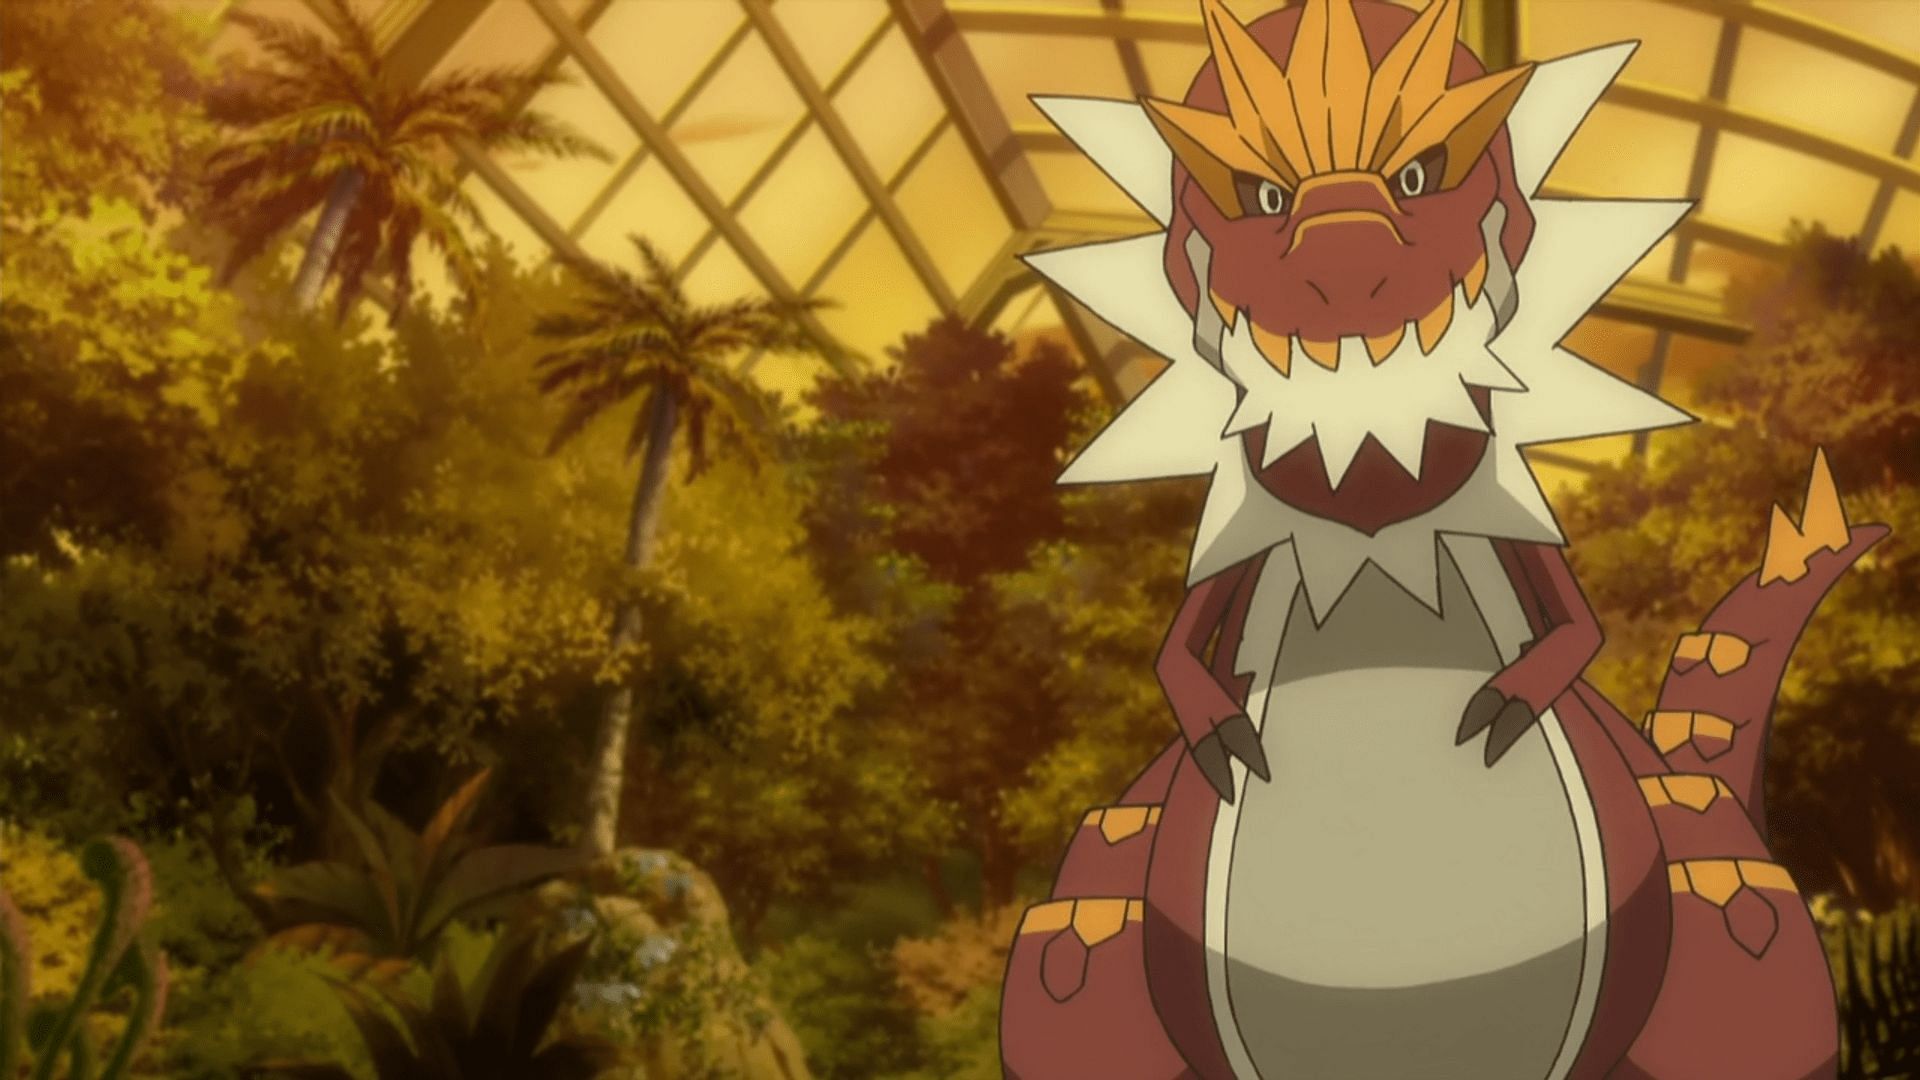 Tyrantrum as it appears in the anime (Image via The Pokemon Company)